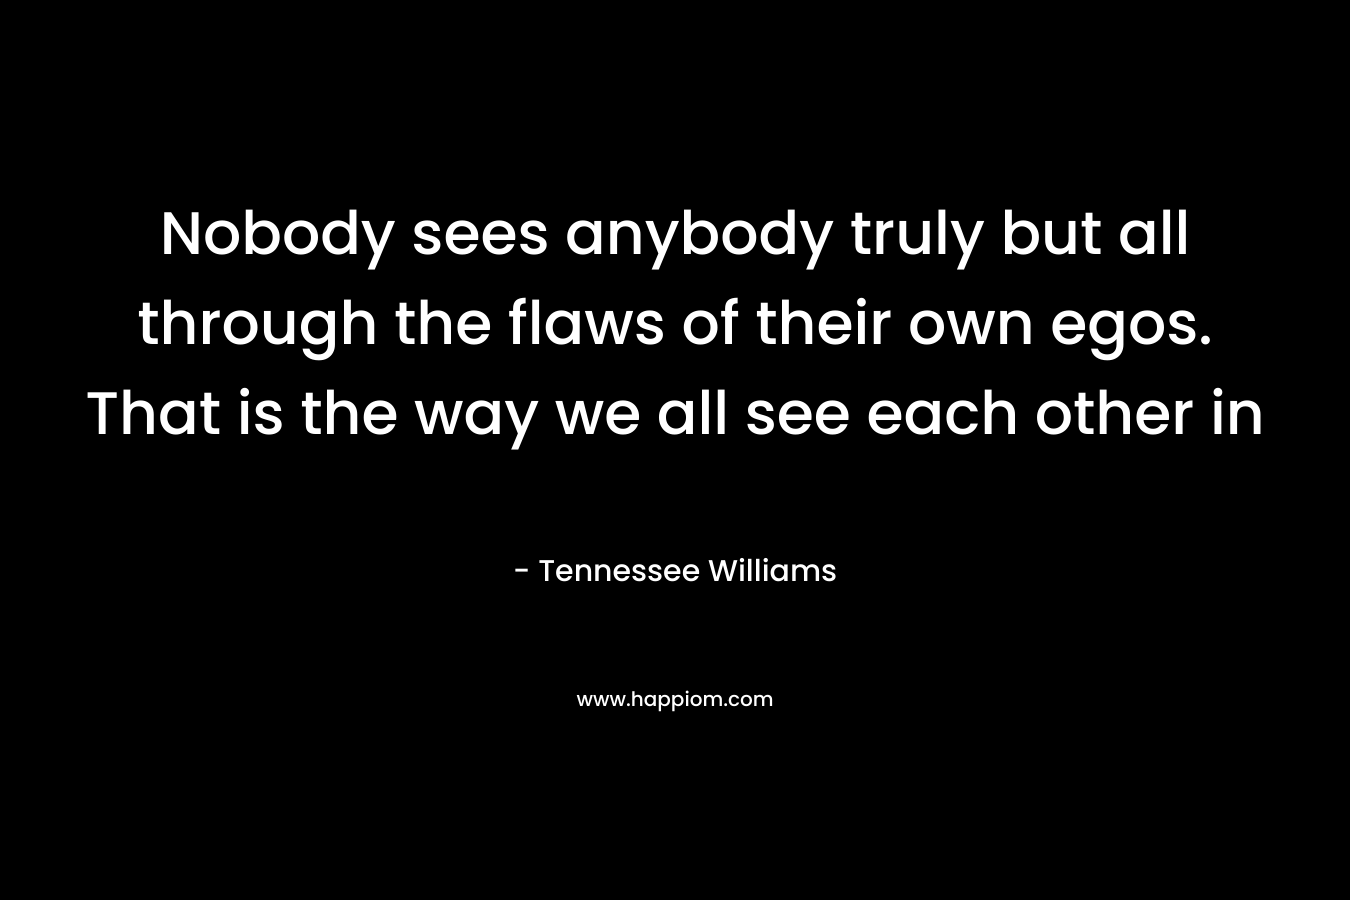 Nobody sees anybody truly but all through the flaws of their own egos. That is the way we all see each other in 